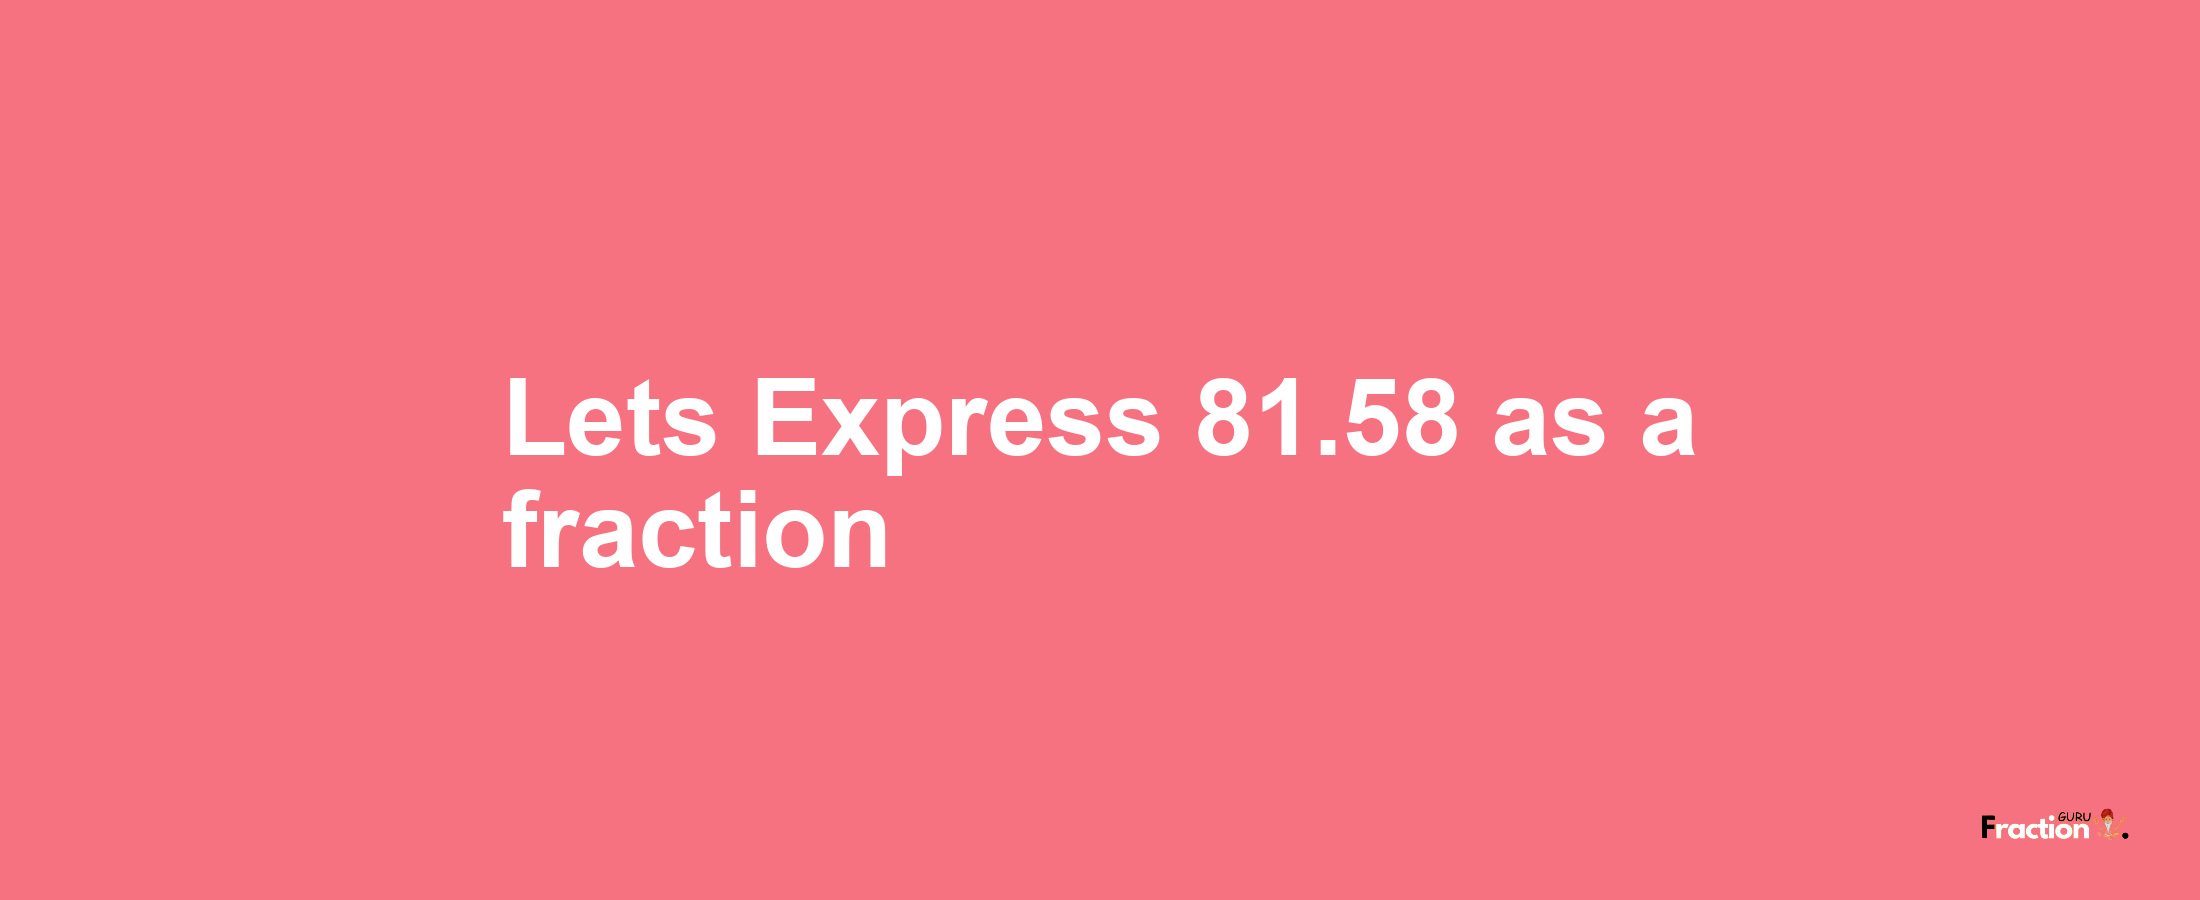 Lets Express 81.58 as afraction